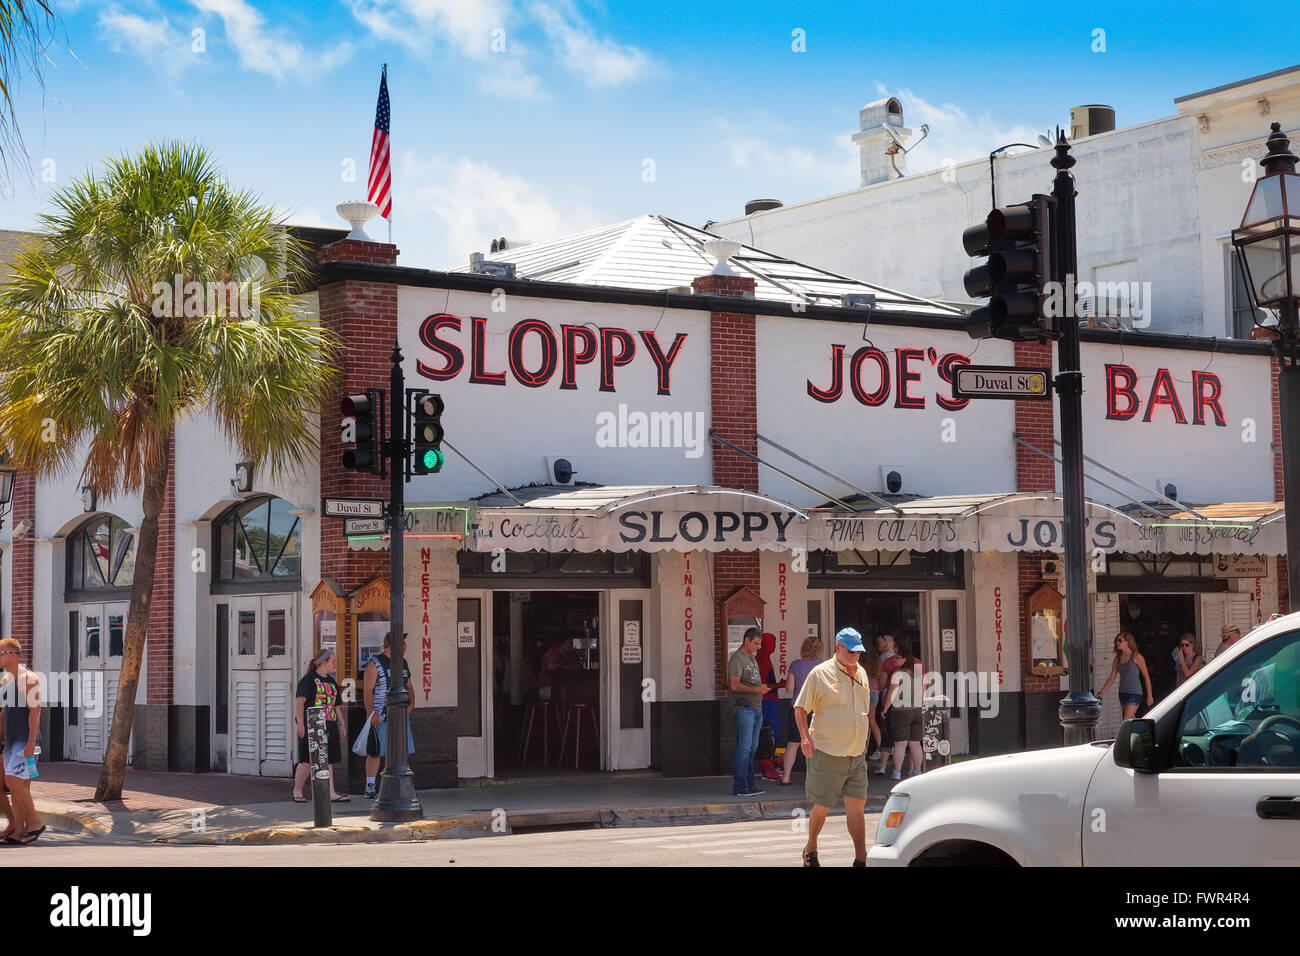 Key West, FL - July 11, 2011:  The historic American bar in Key West, located on Duval Street. Stock Photo